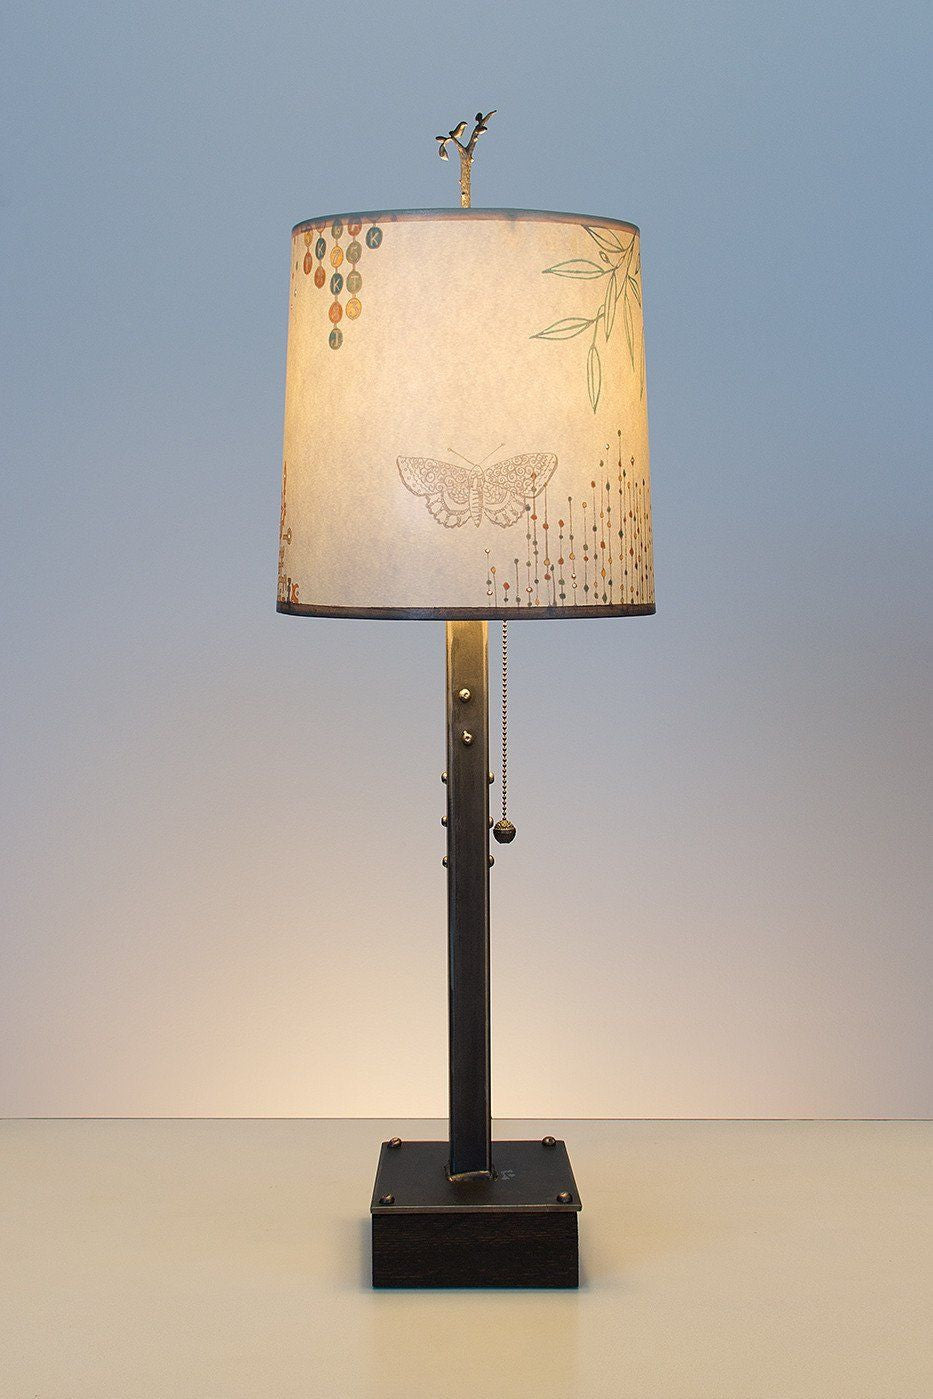 Janna Ugone & Co Table Lamps Steel Table Lamp on Wood with Medium Drum Shade in Ecru Journey